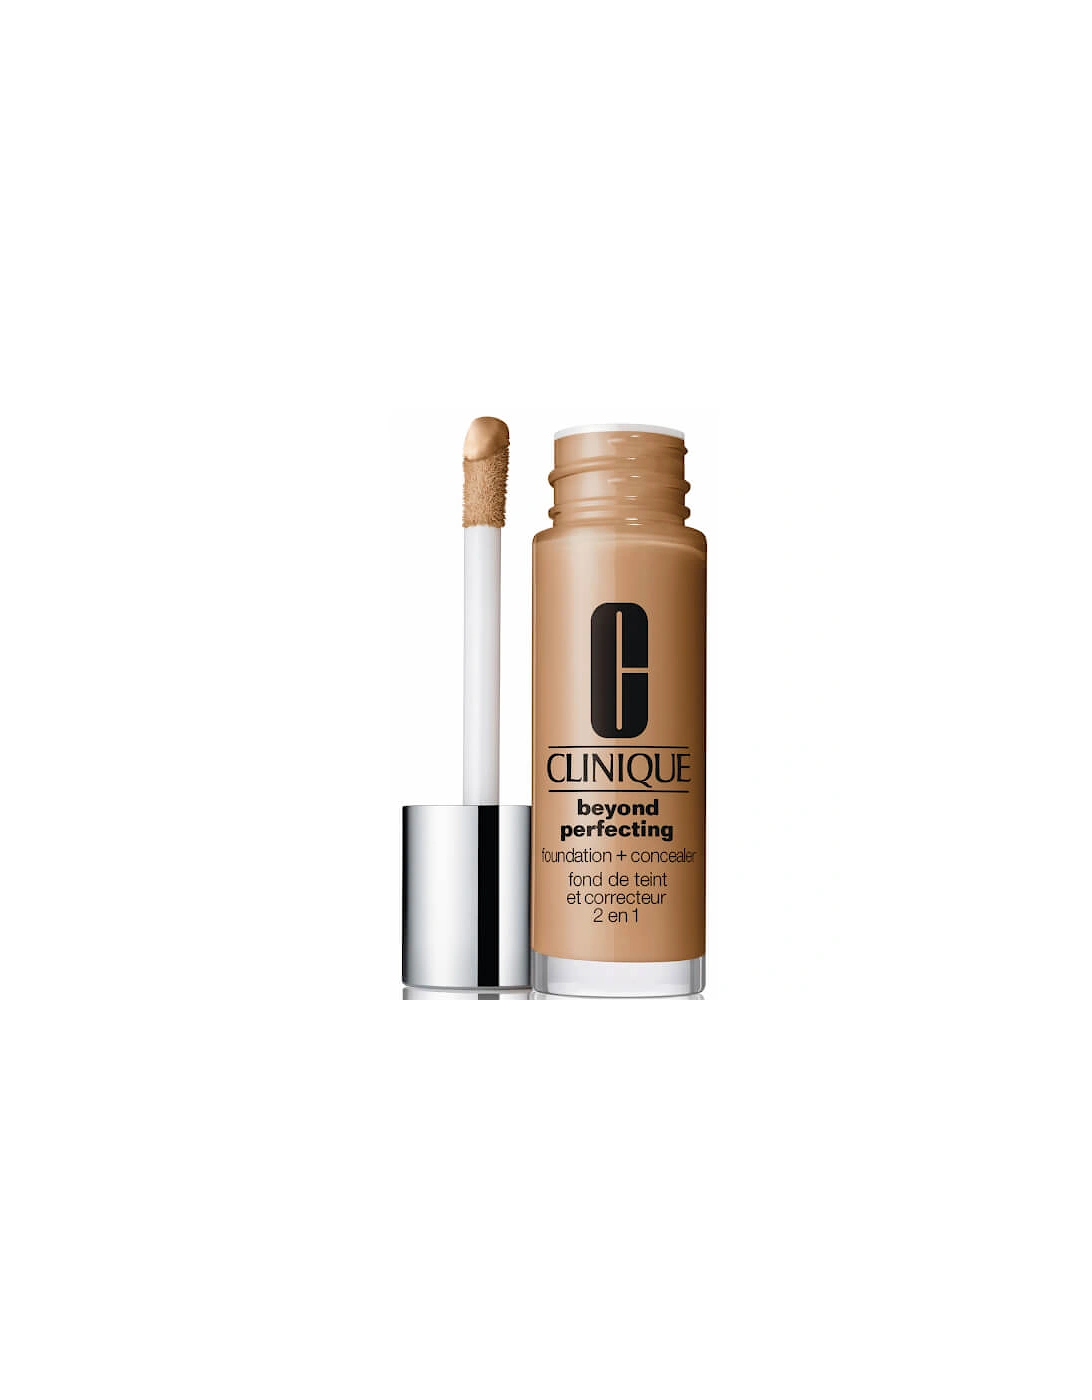 Beyond Perfecting Foundation and Concealer Sand, 2 of 1